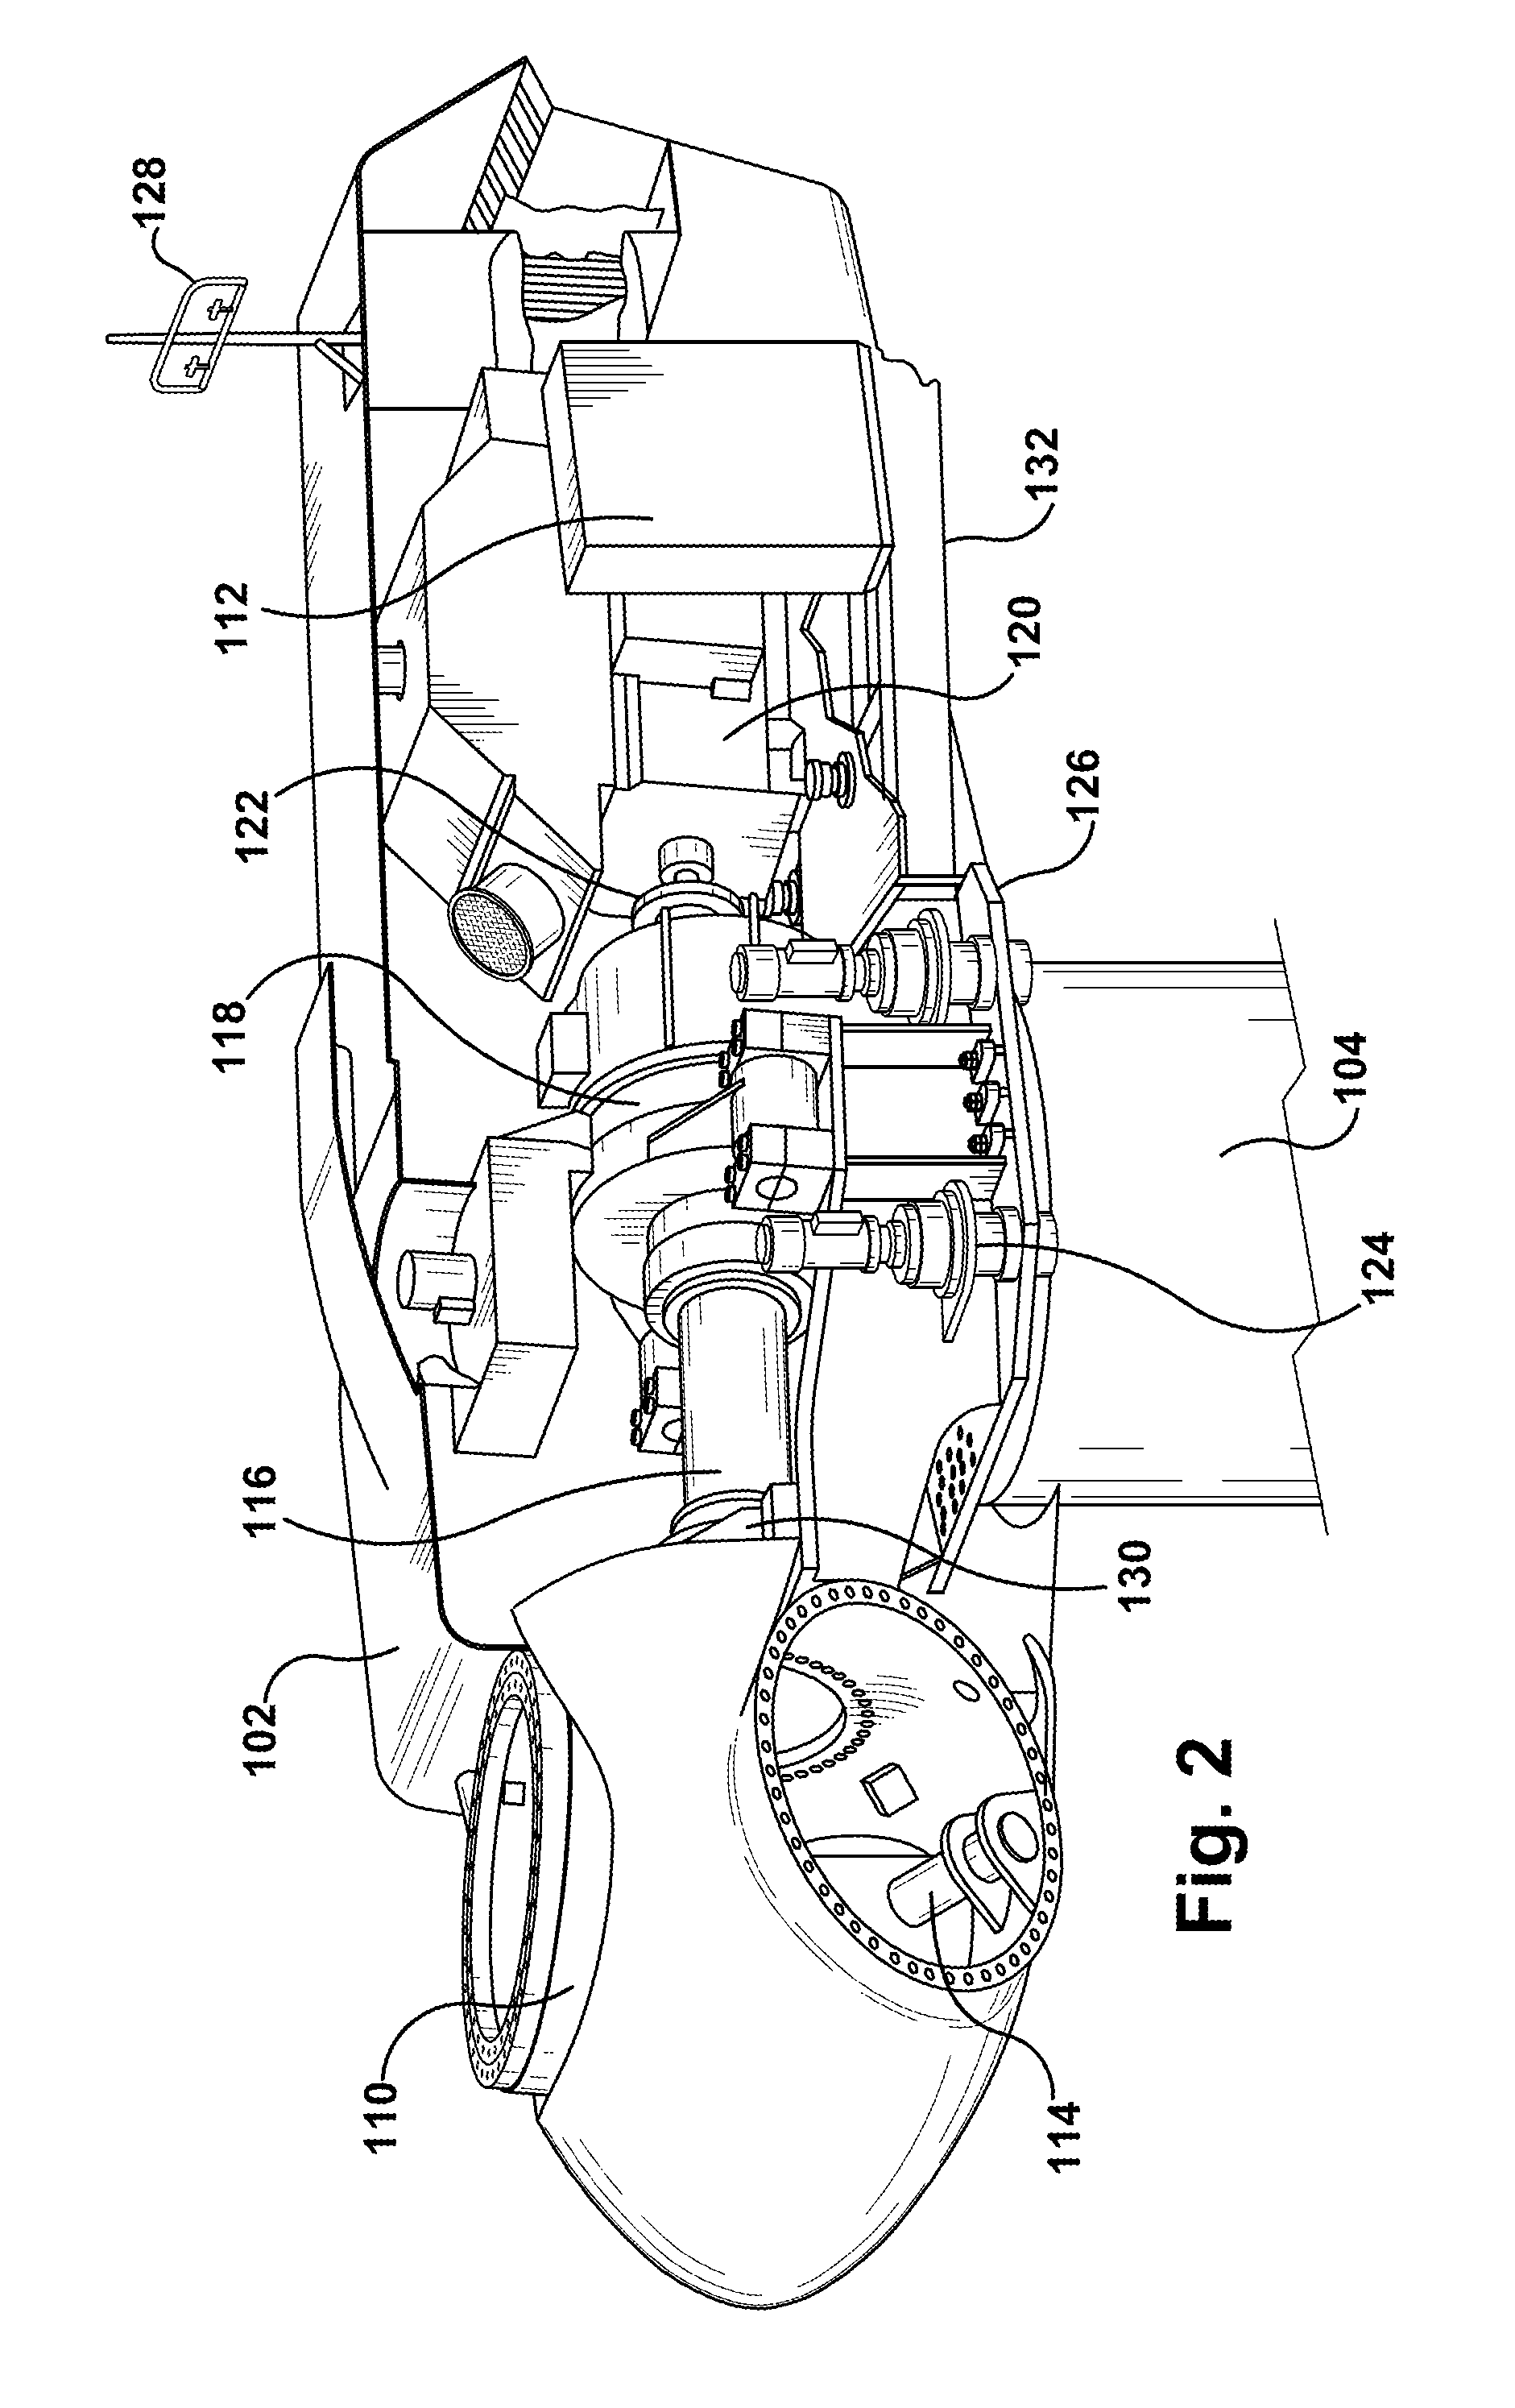 Bearing with alternative load path for extreme loads